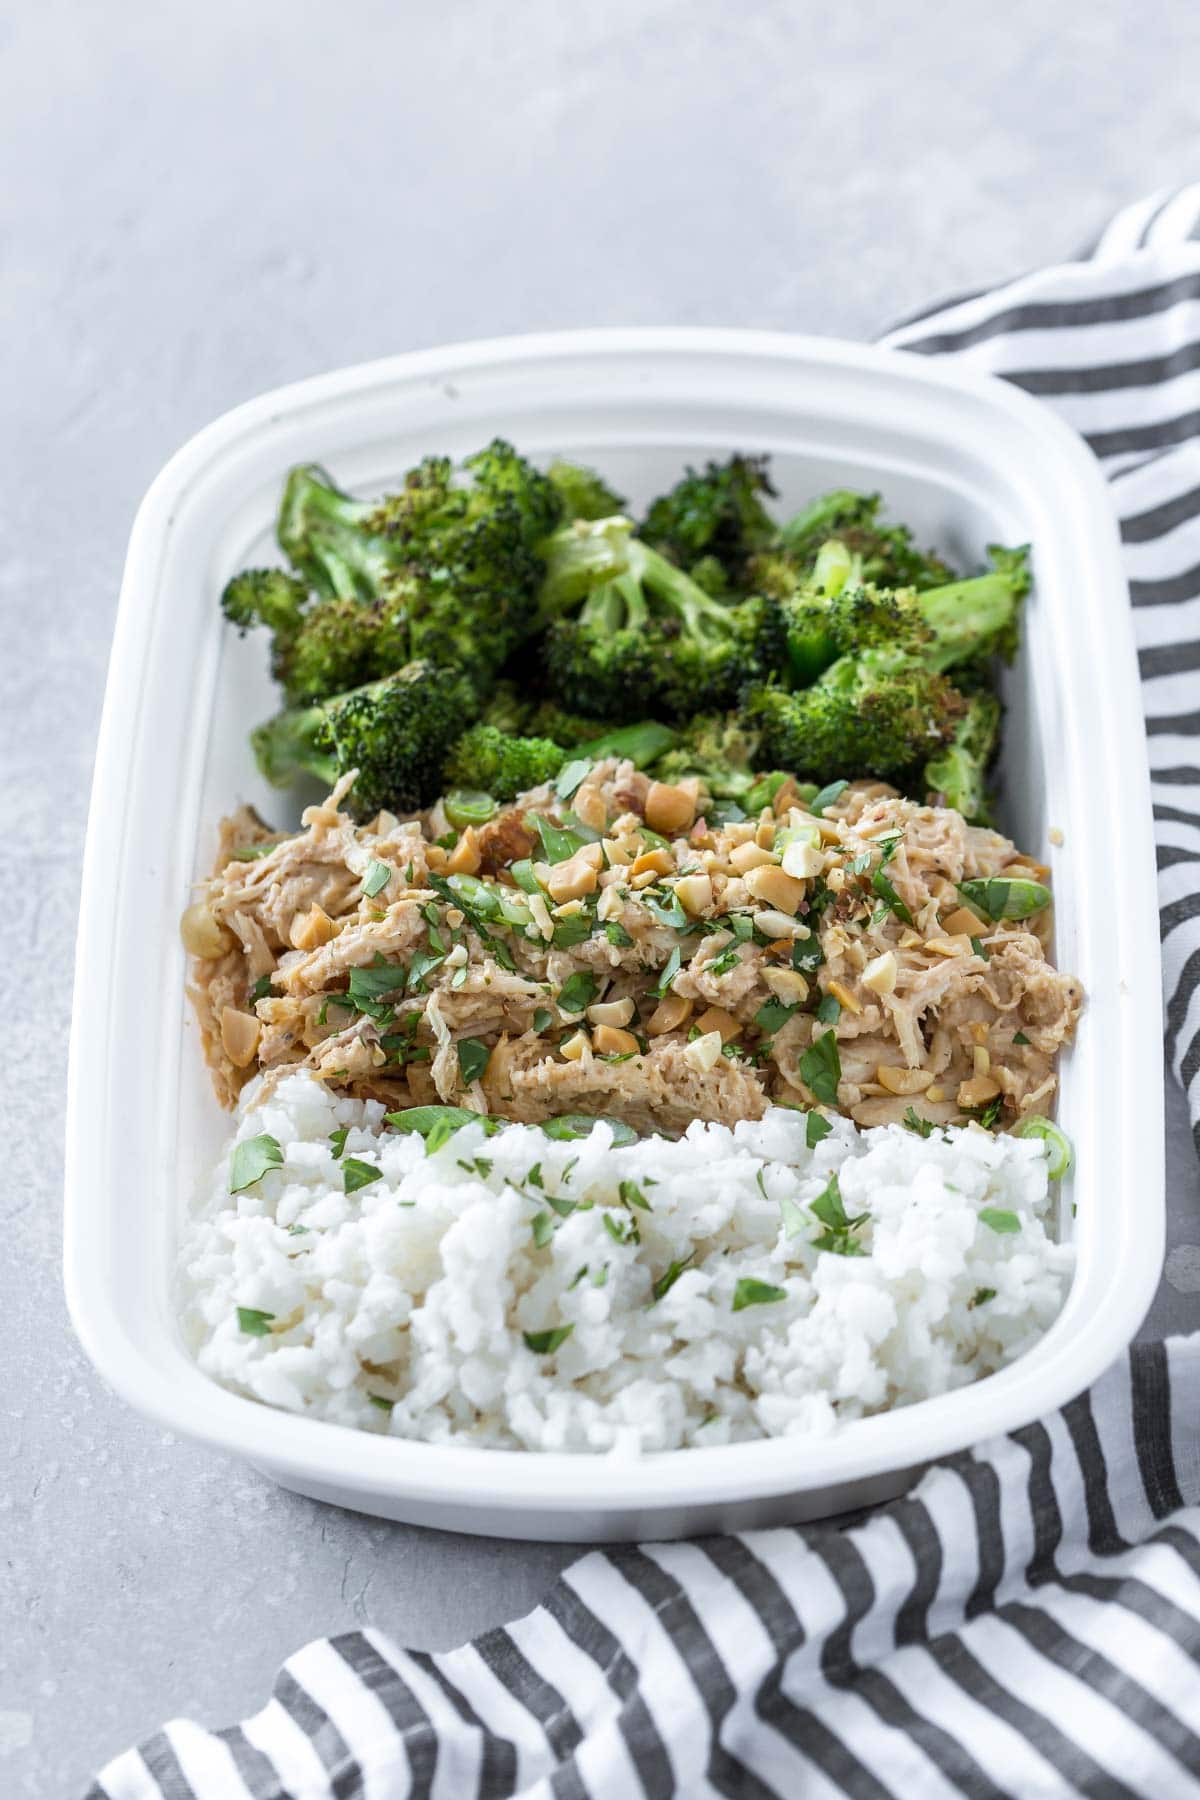 a white takeout container with coconut rice, shredded thai peanut chicken garnished with cilantro and peanuts, and roasted broccoli, on a gray background with a black and white striped napkin